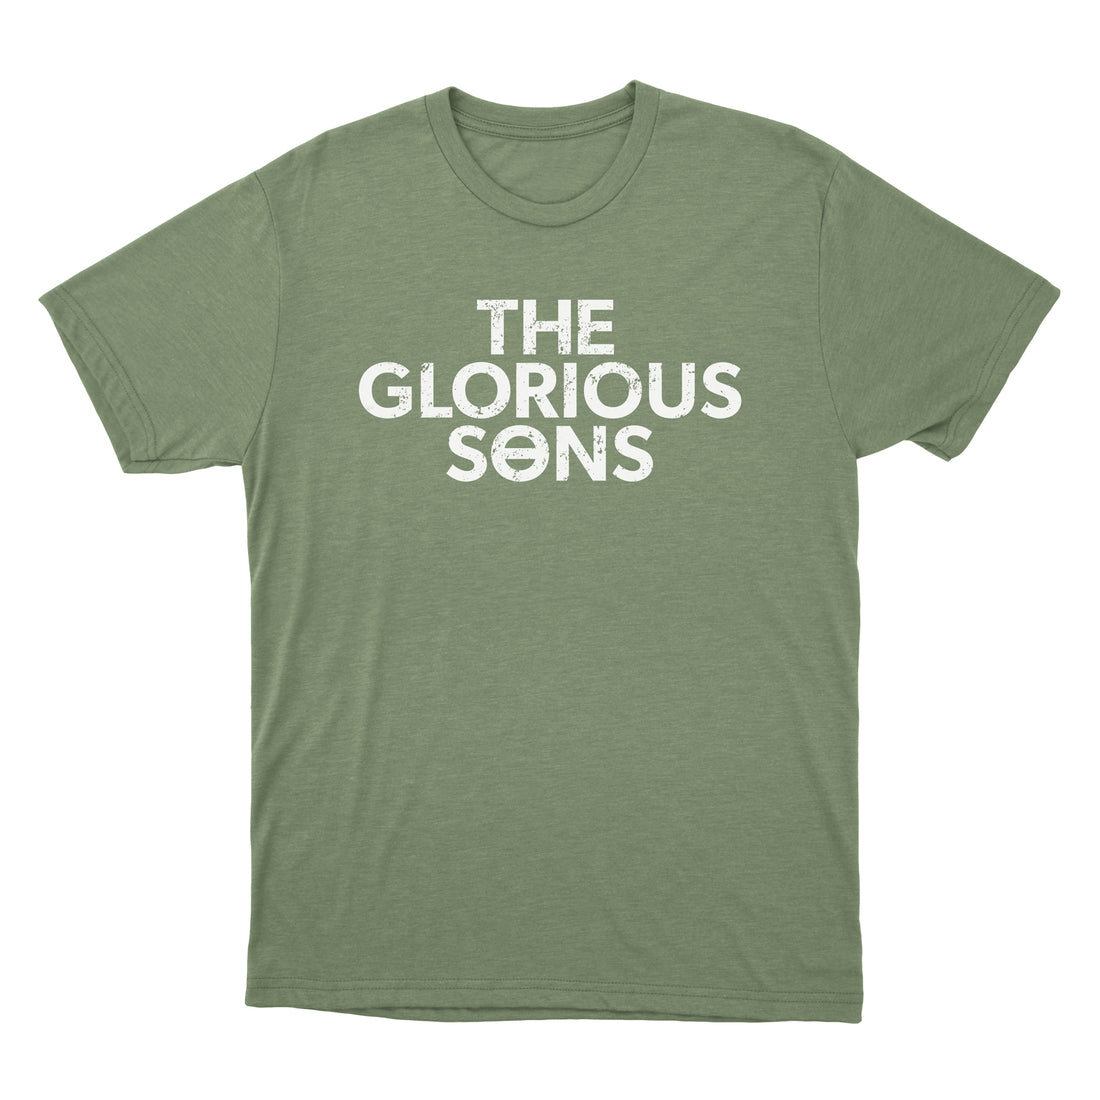 The Glorious Sons - Classic Logo - Tee